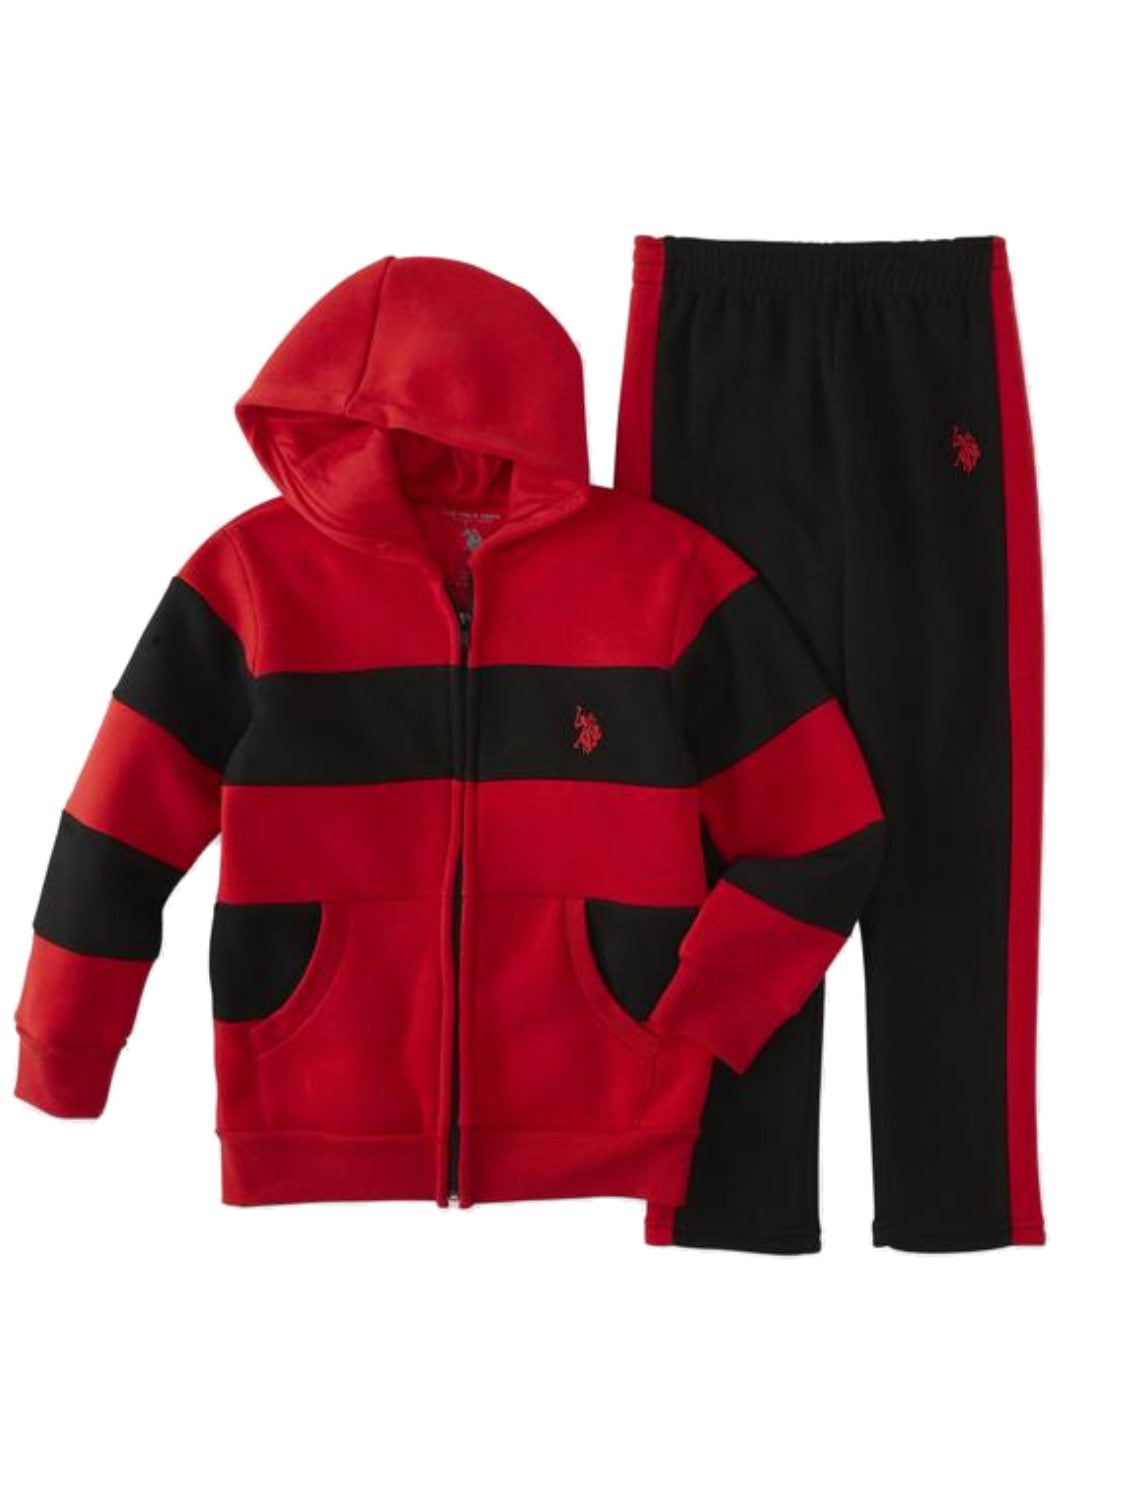 black and red polo jacket